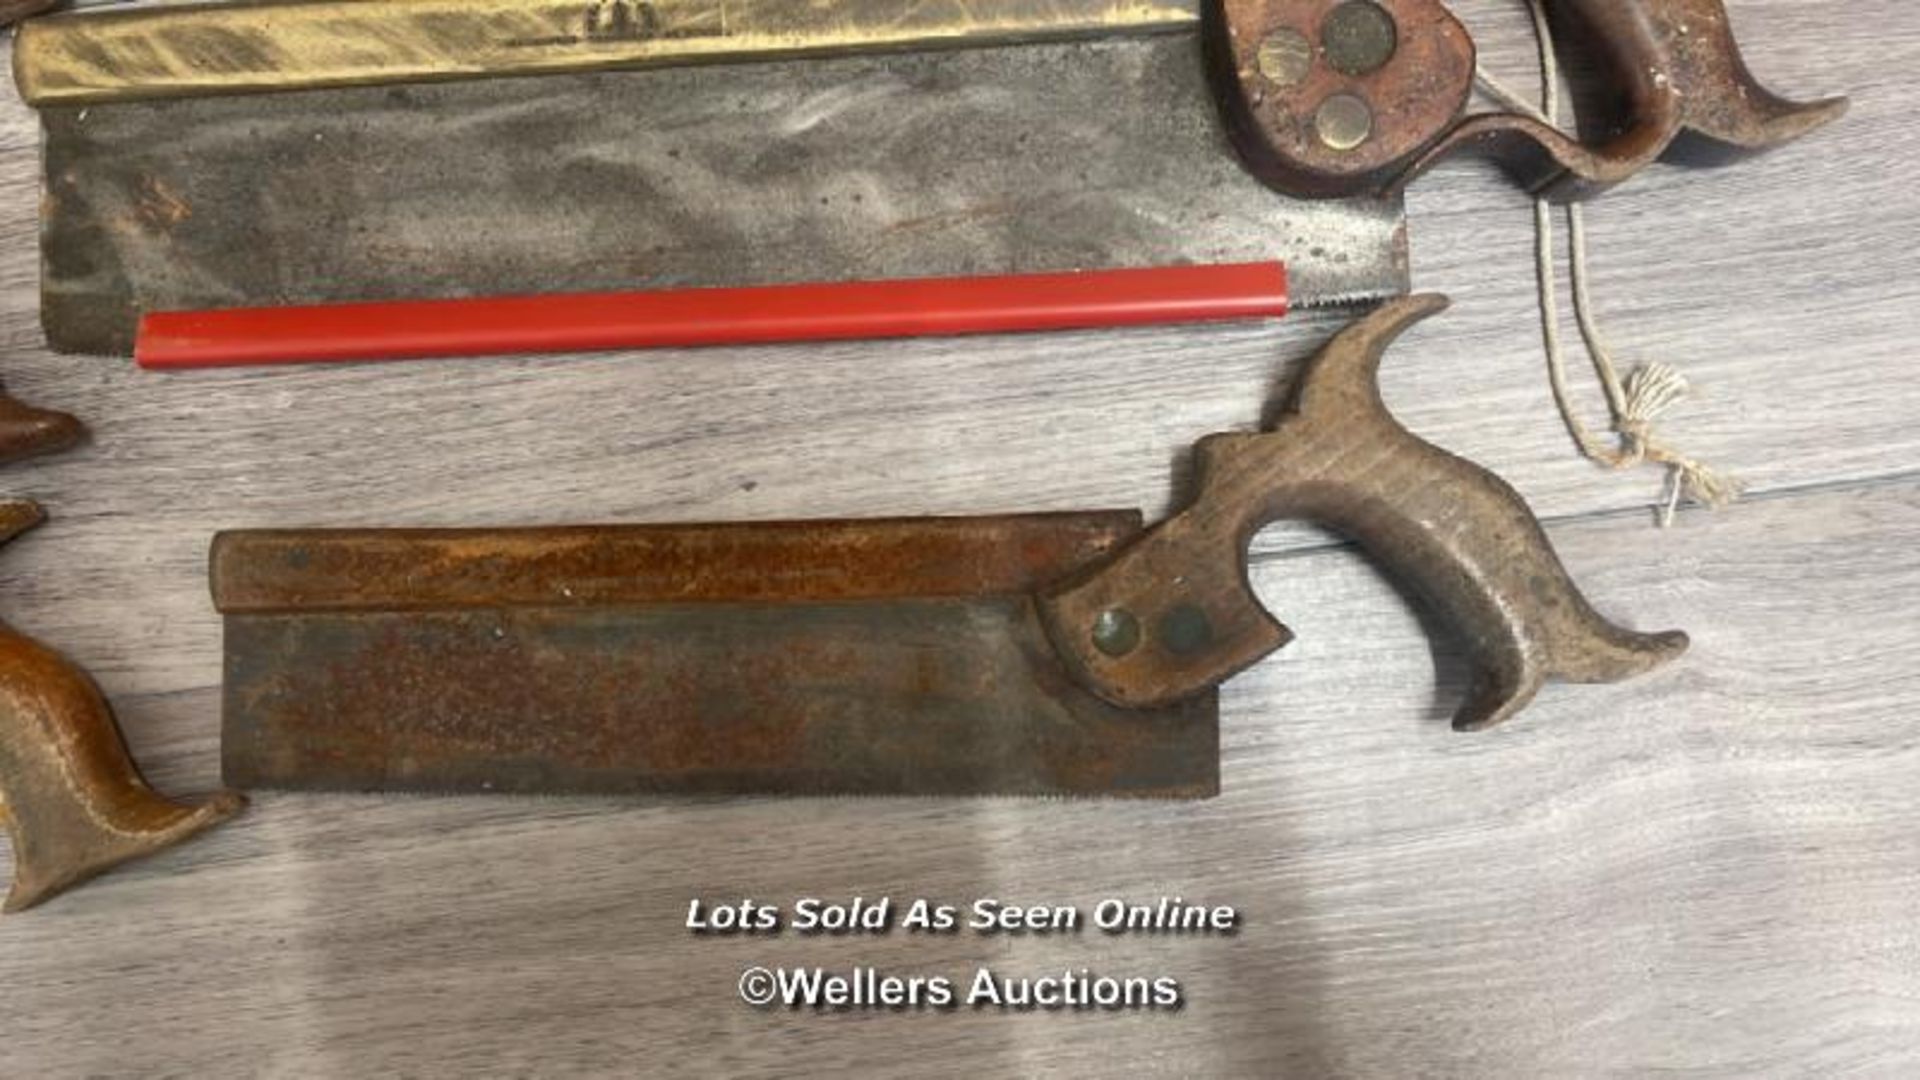 TEN SMALL VINTAGE HAND SAWS INCLUDING SPEAR & JACKSON AND SALMANS - Image 11 of 11